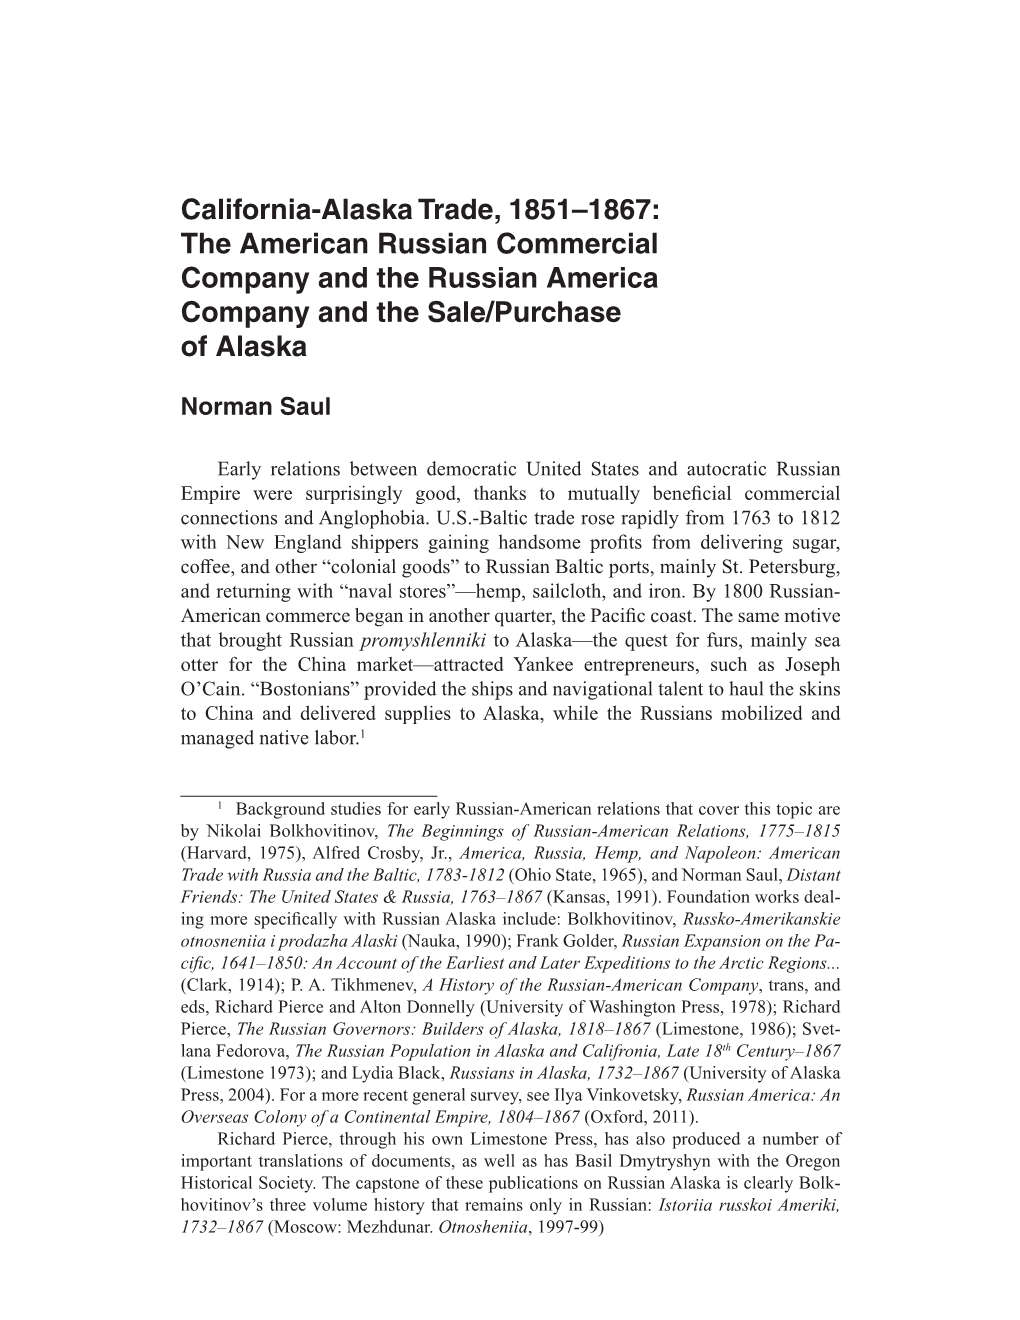 California-Alaska Trade, 1851–1867: the American Russian Commercial Company and the Russian America Company and the Sale/Purchase of Alaska